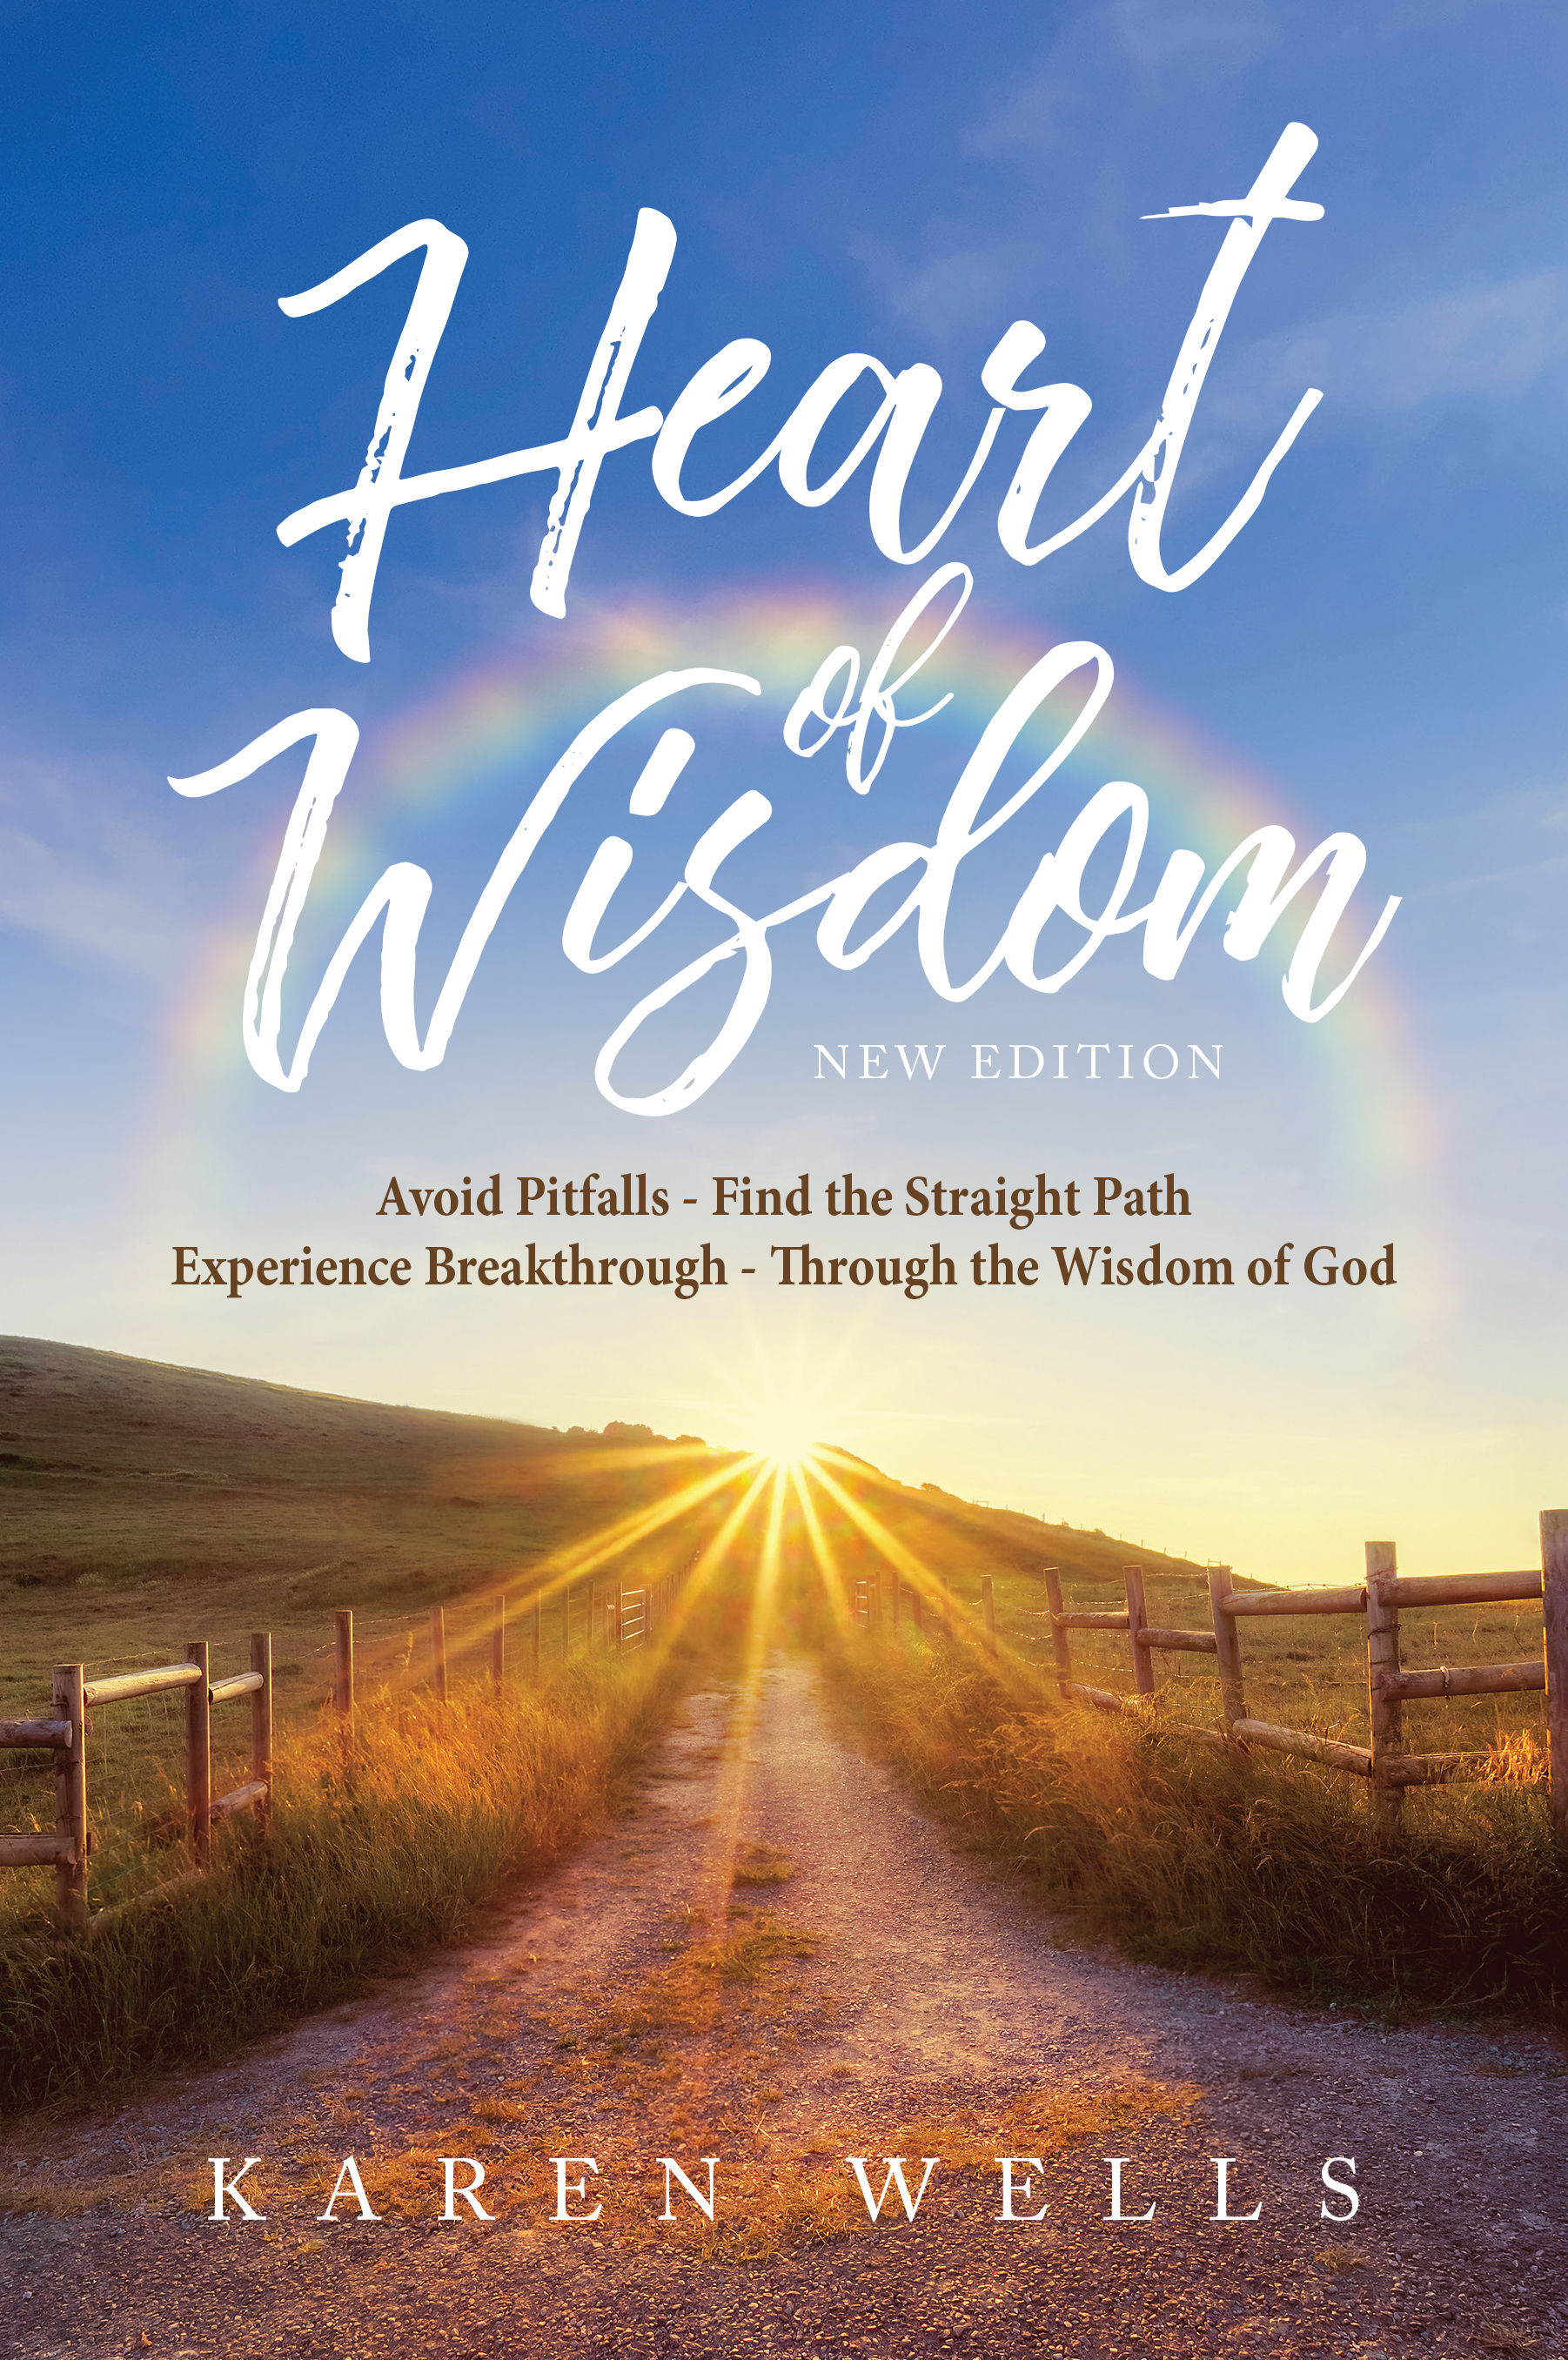 A Truthful and Life Changing Book Penned by Karen Wells